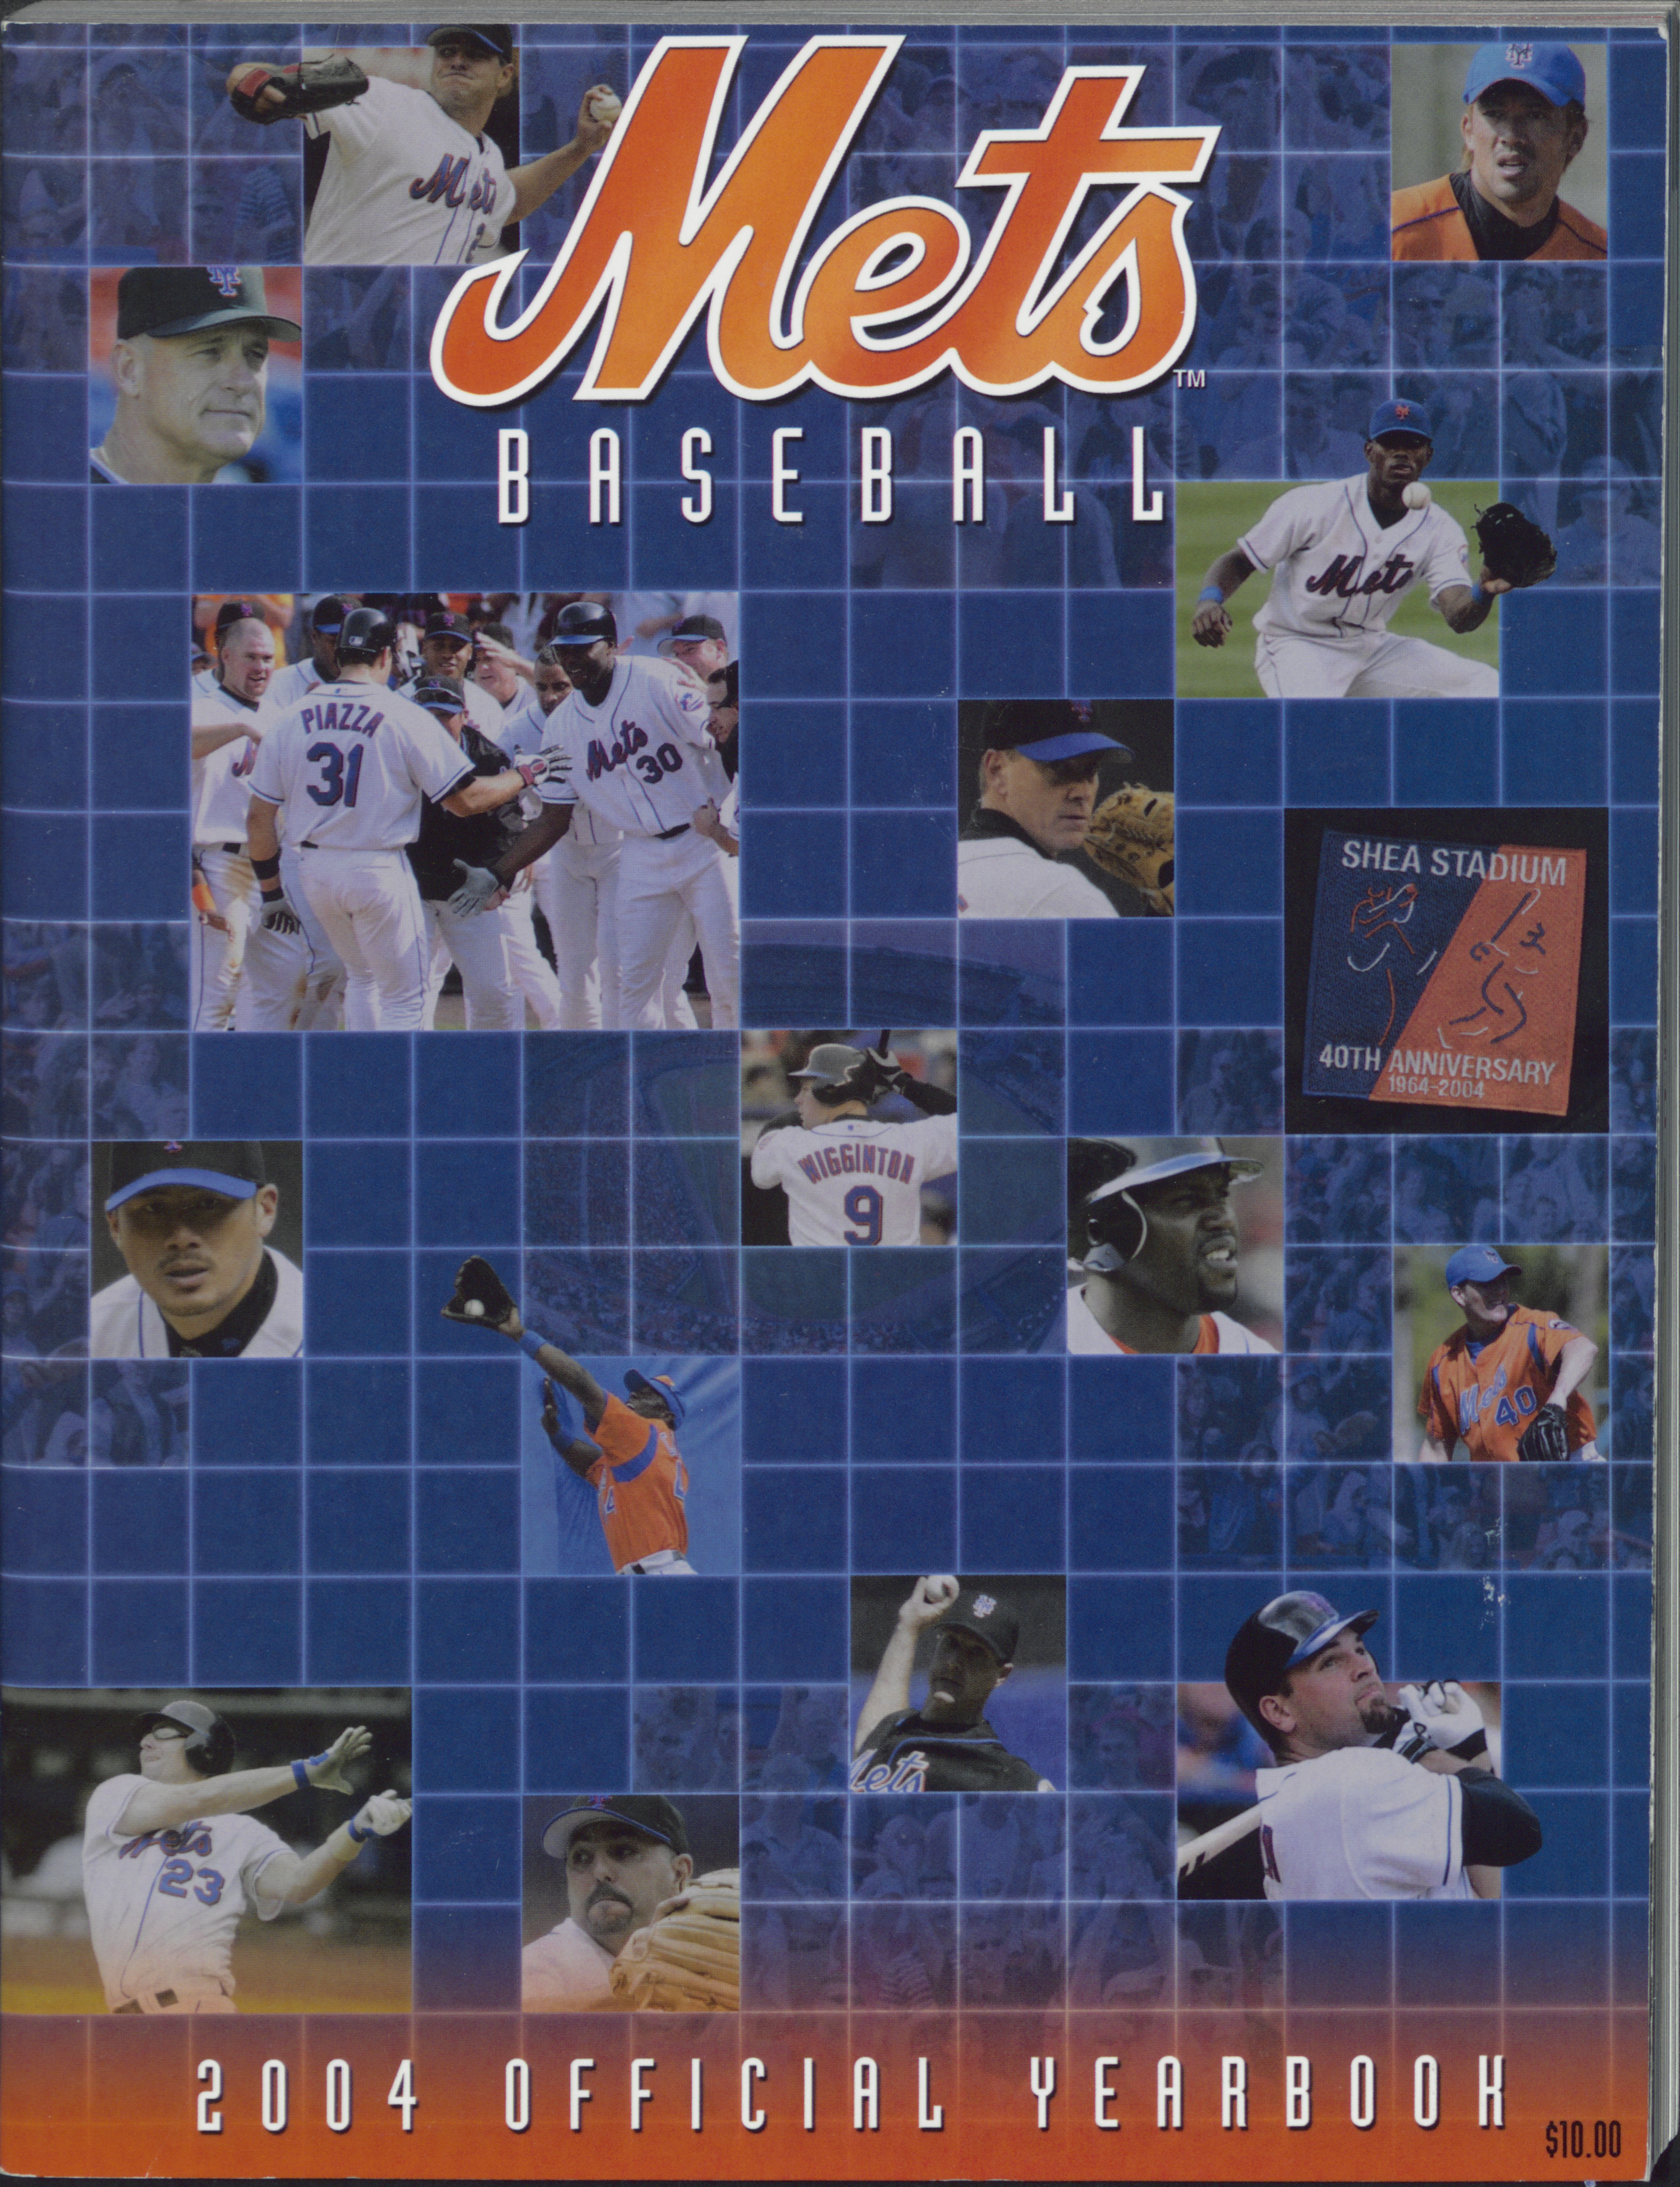 A MONUMENT TO THE METS, SHEA STADIUM – Mets Vault